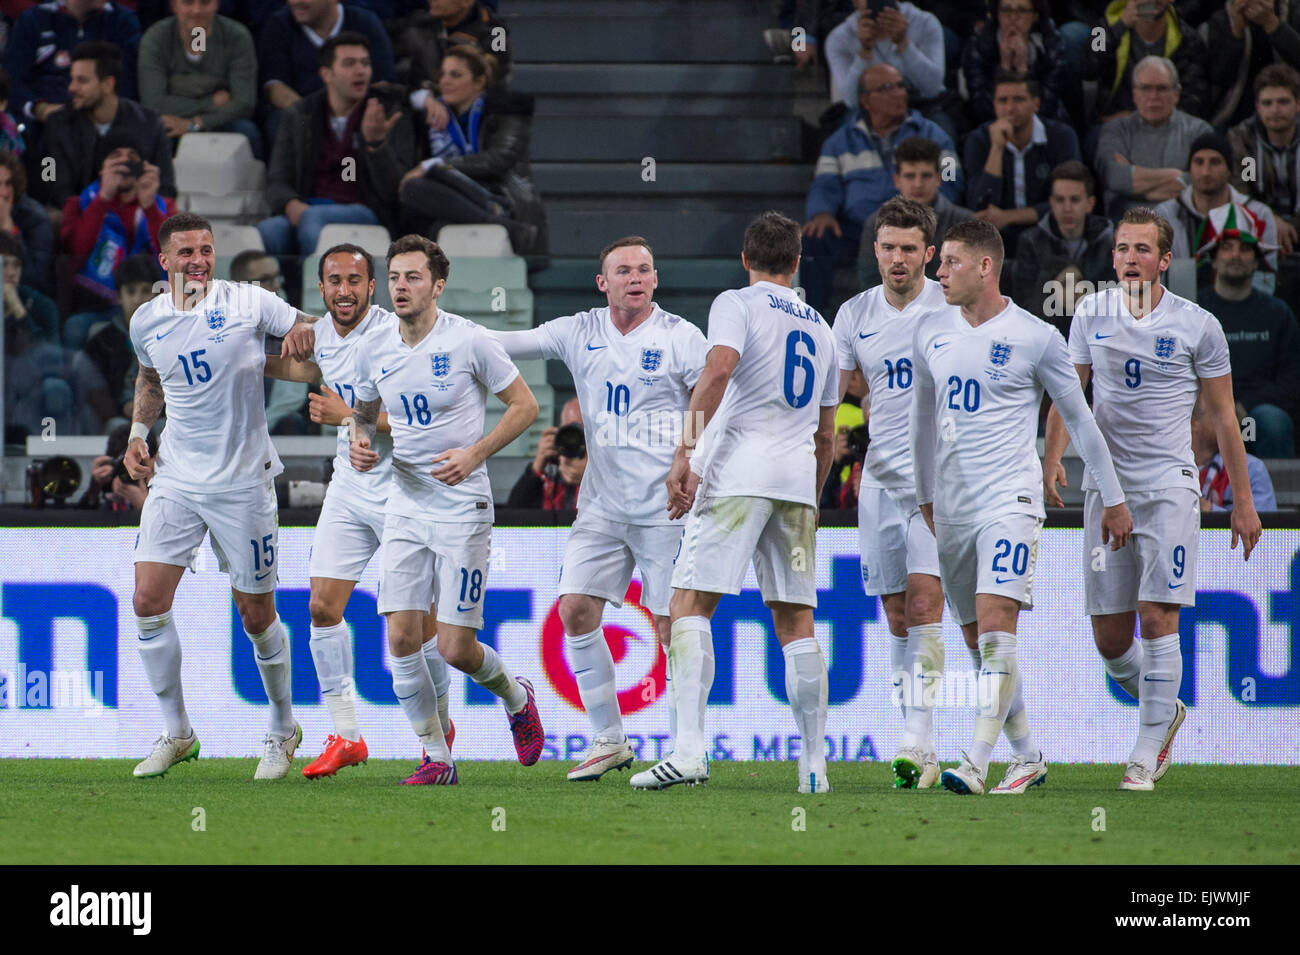 Turin, Italy. 31st Mar, 2015. England team group (ENG) Football/Soccer : Andorra Townsend (2L) of England celebrates his goal during the International Friendly match between Italy 1-1 England at Juventus Stadium in Turin, Italy . © Maurizio Borsari/AFLO/Alamy Live News Stock Photo